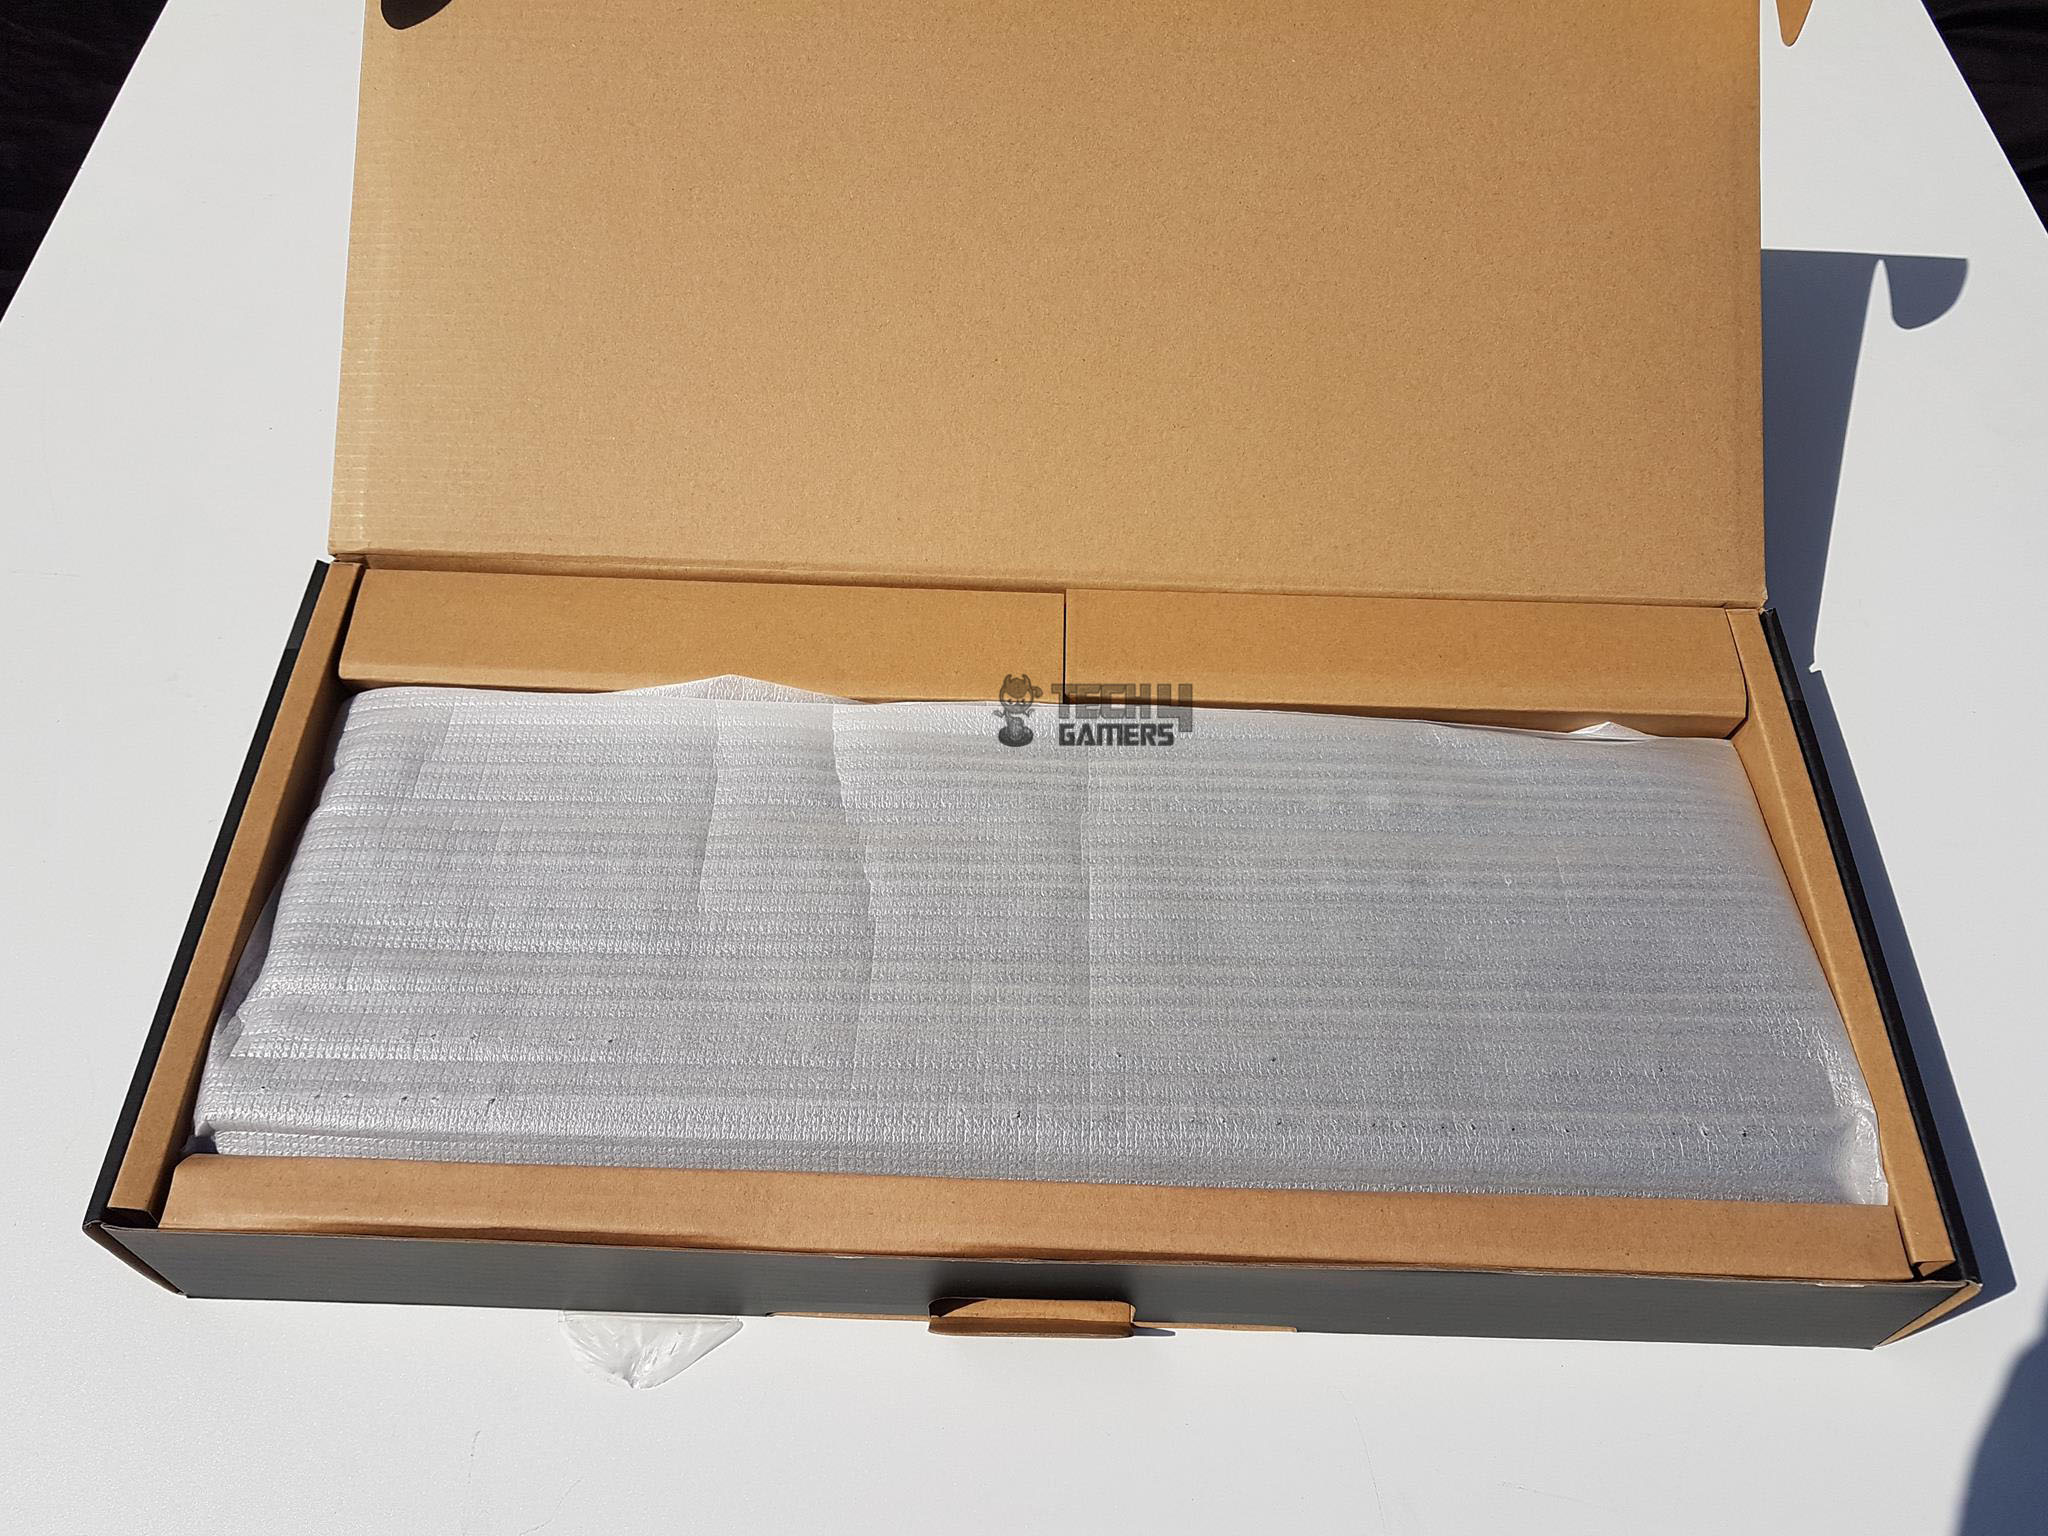 TT Keyboards Packaging and Unboxing